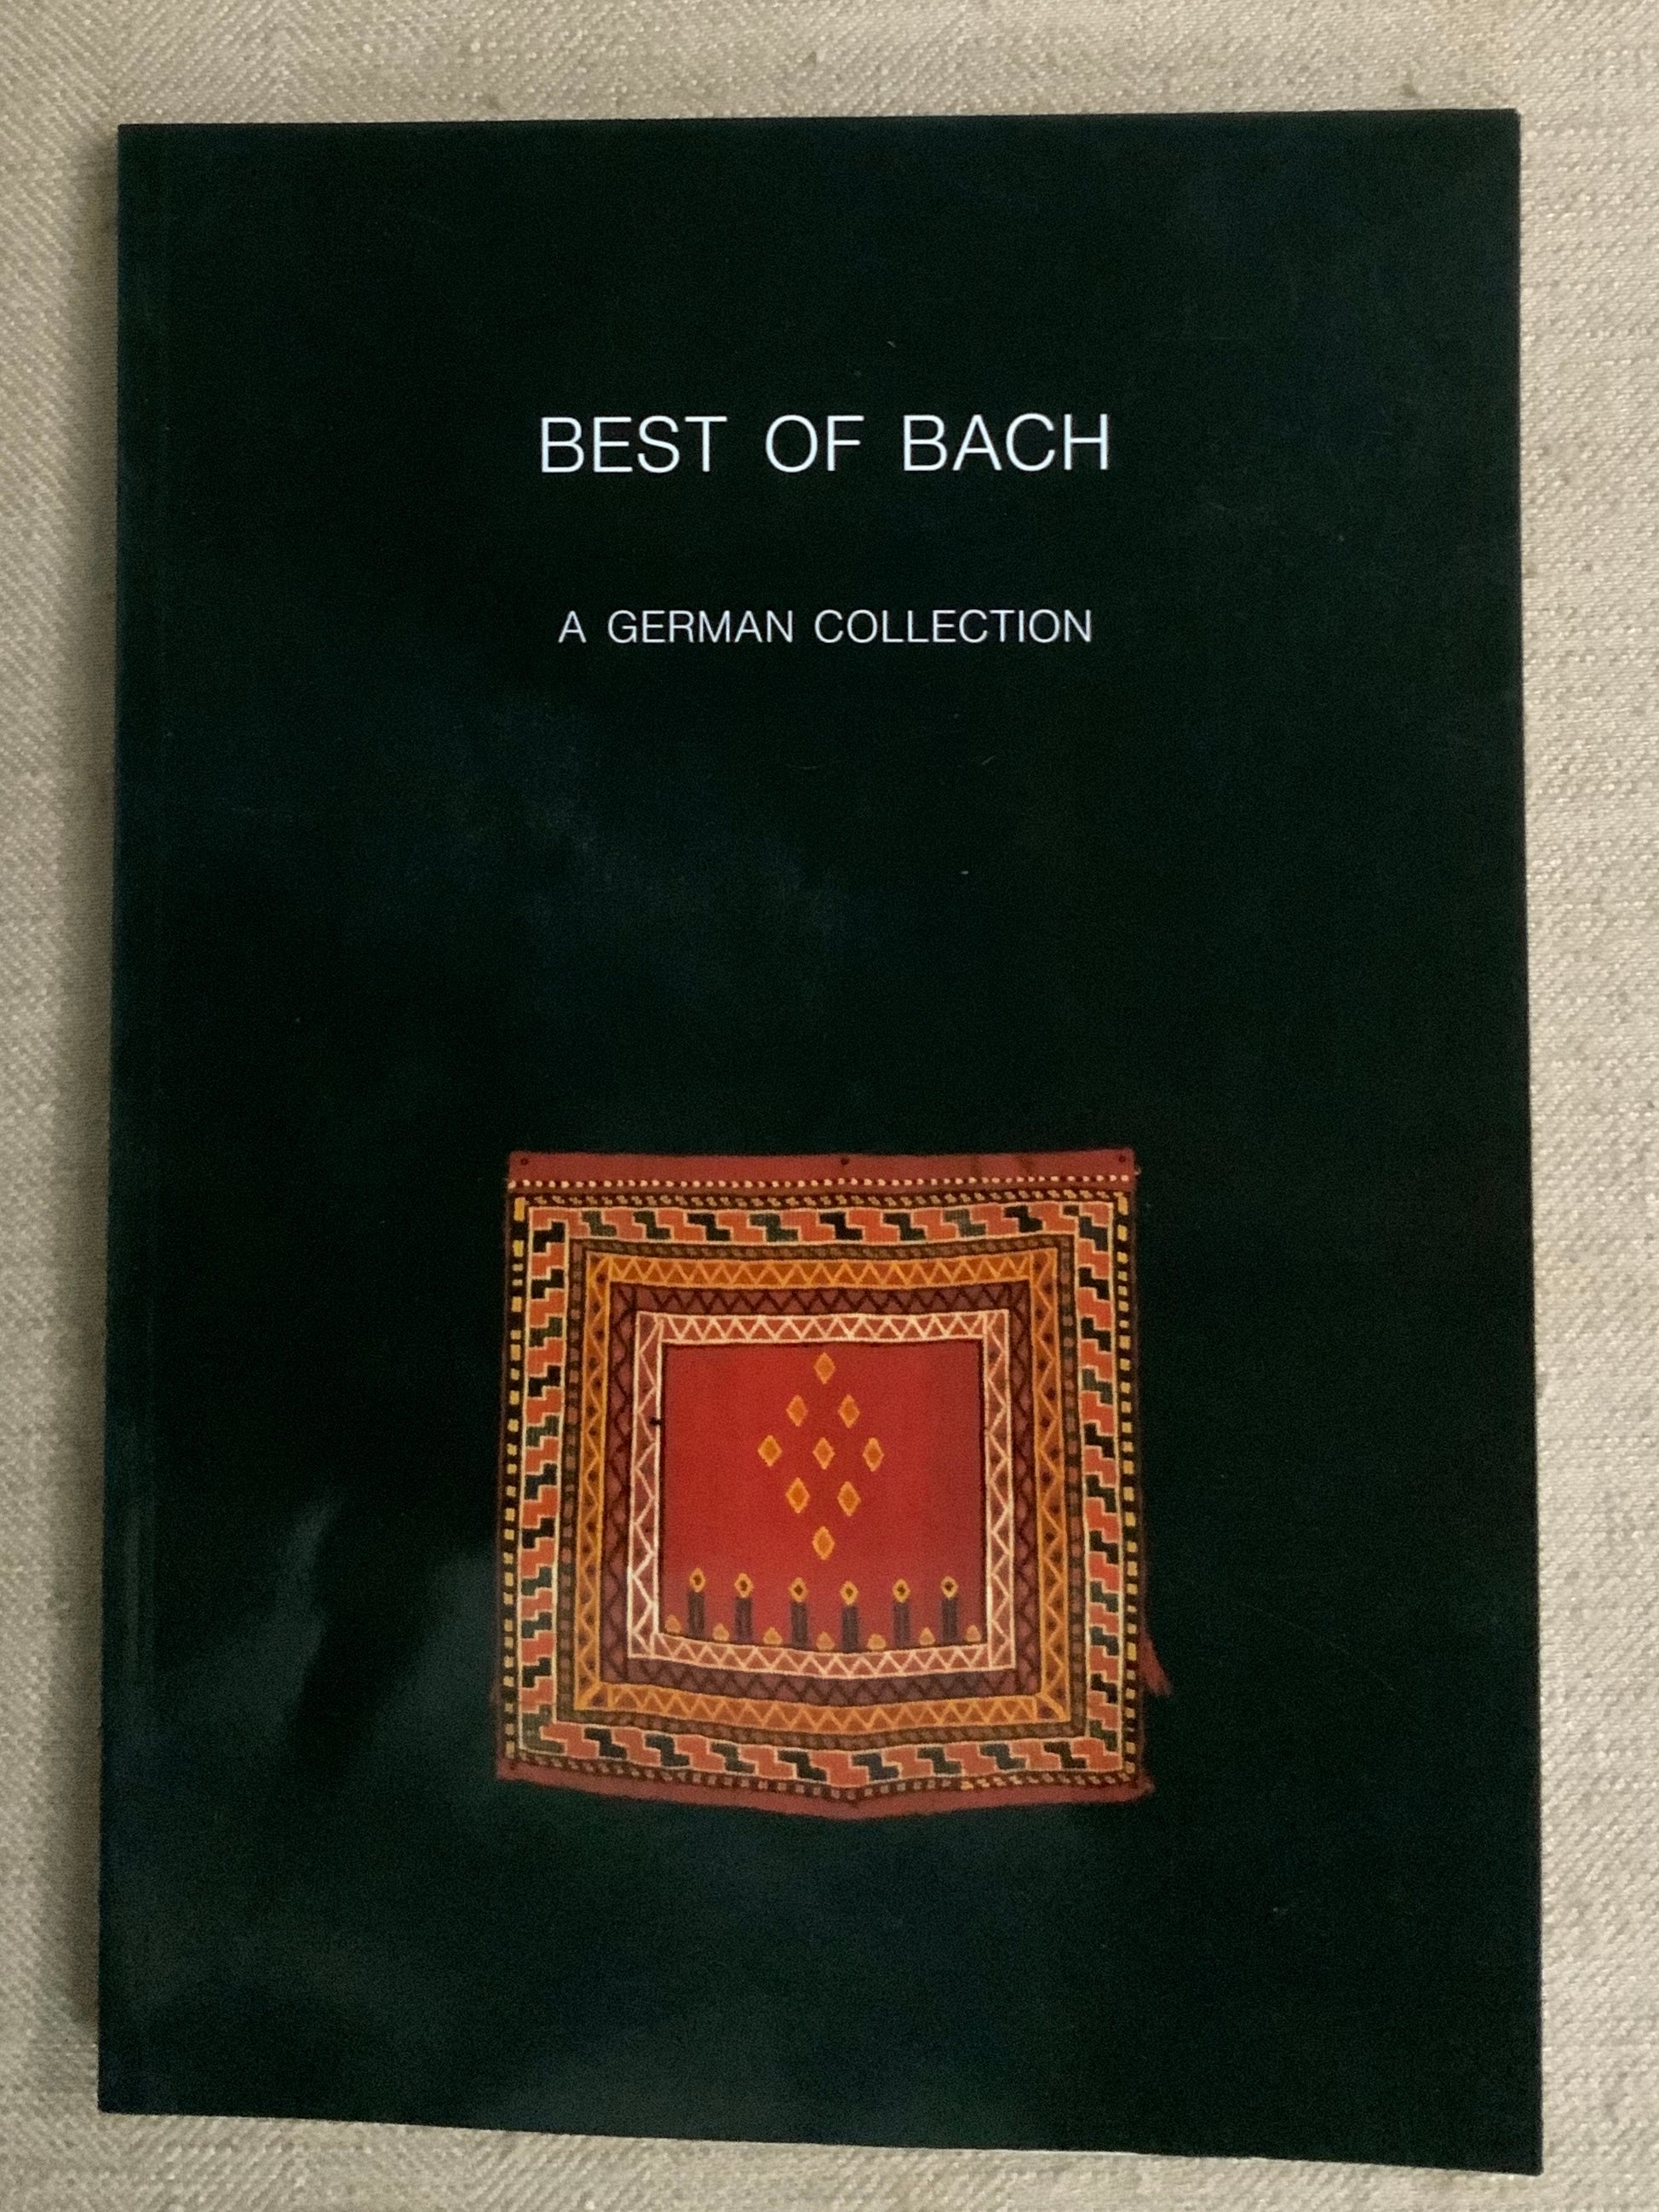 BEST OF BACH a catalogue collection of Hans-Gerhard Bach